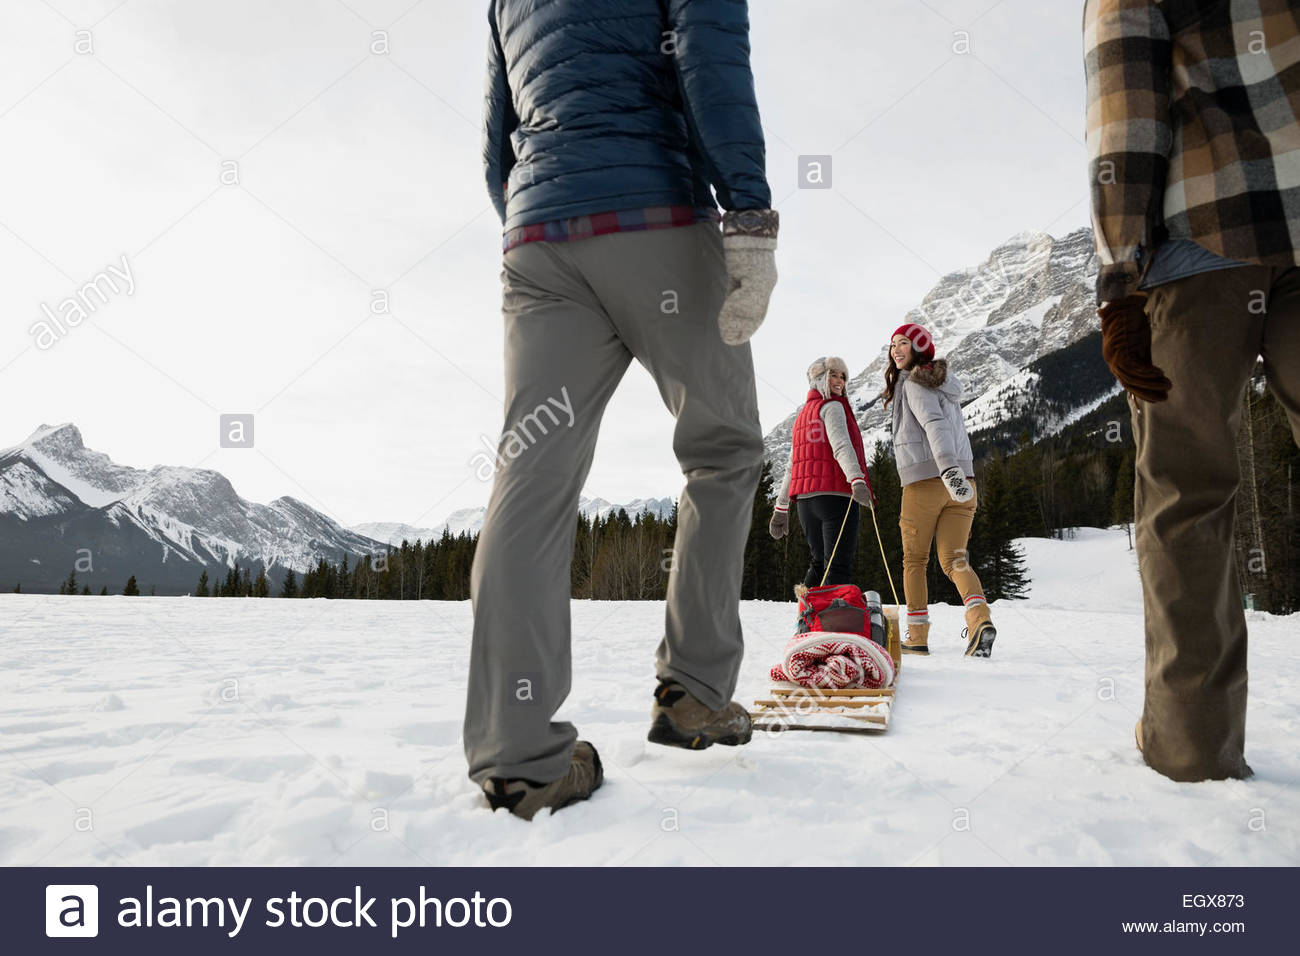 Couples sledding in snowy field below mountains Stock Photo